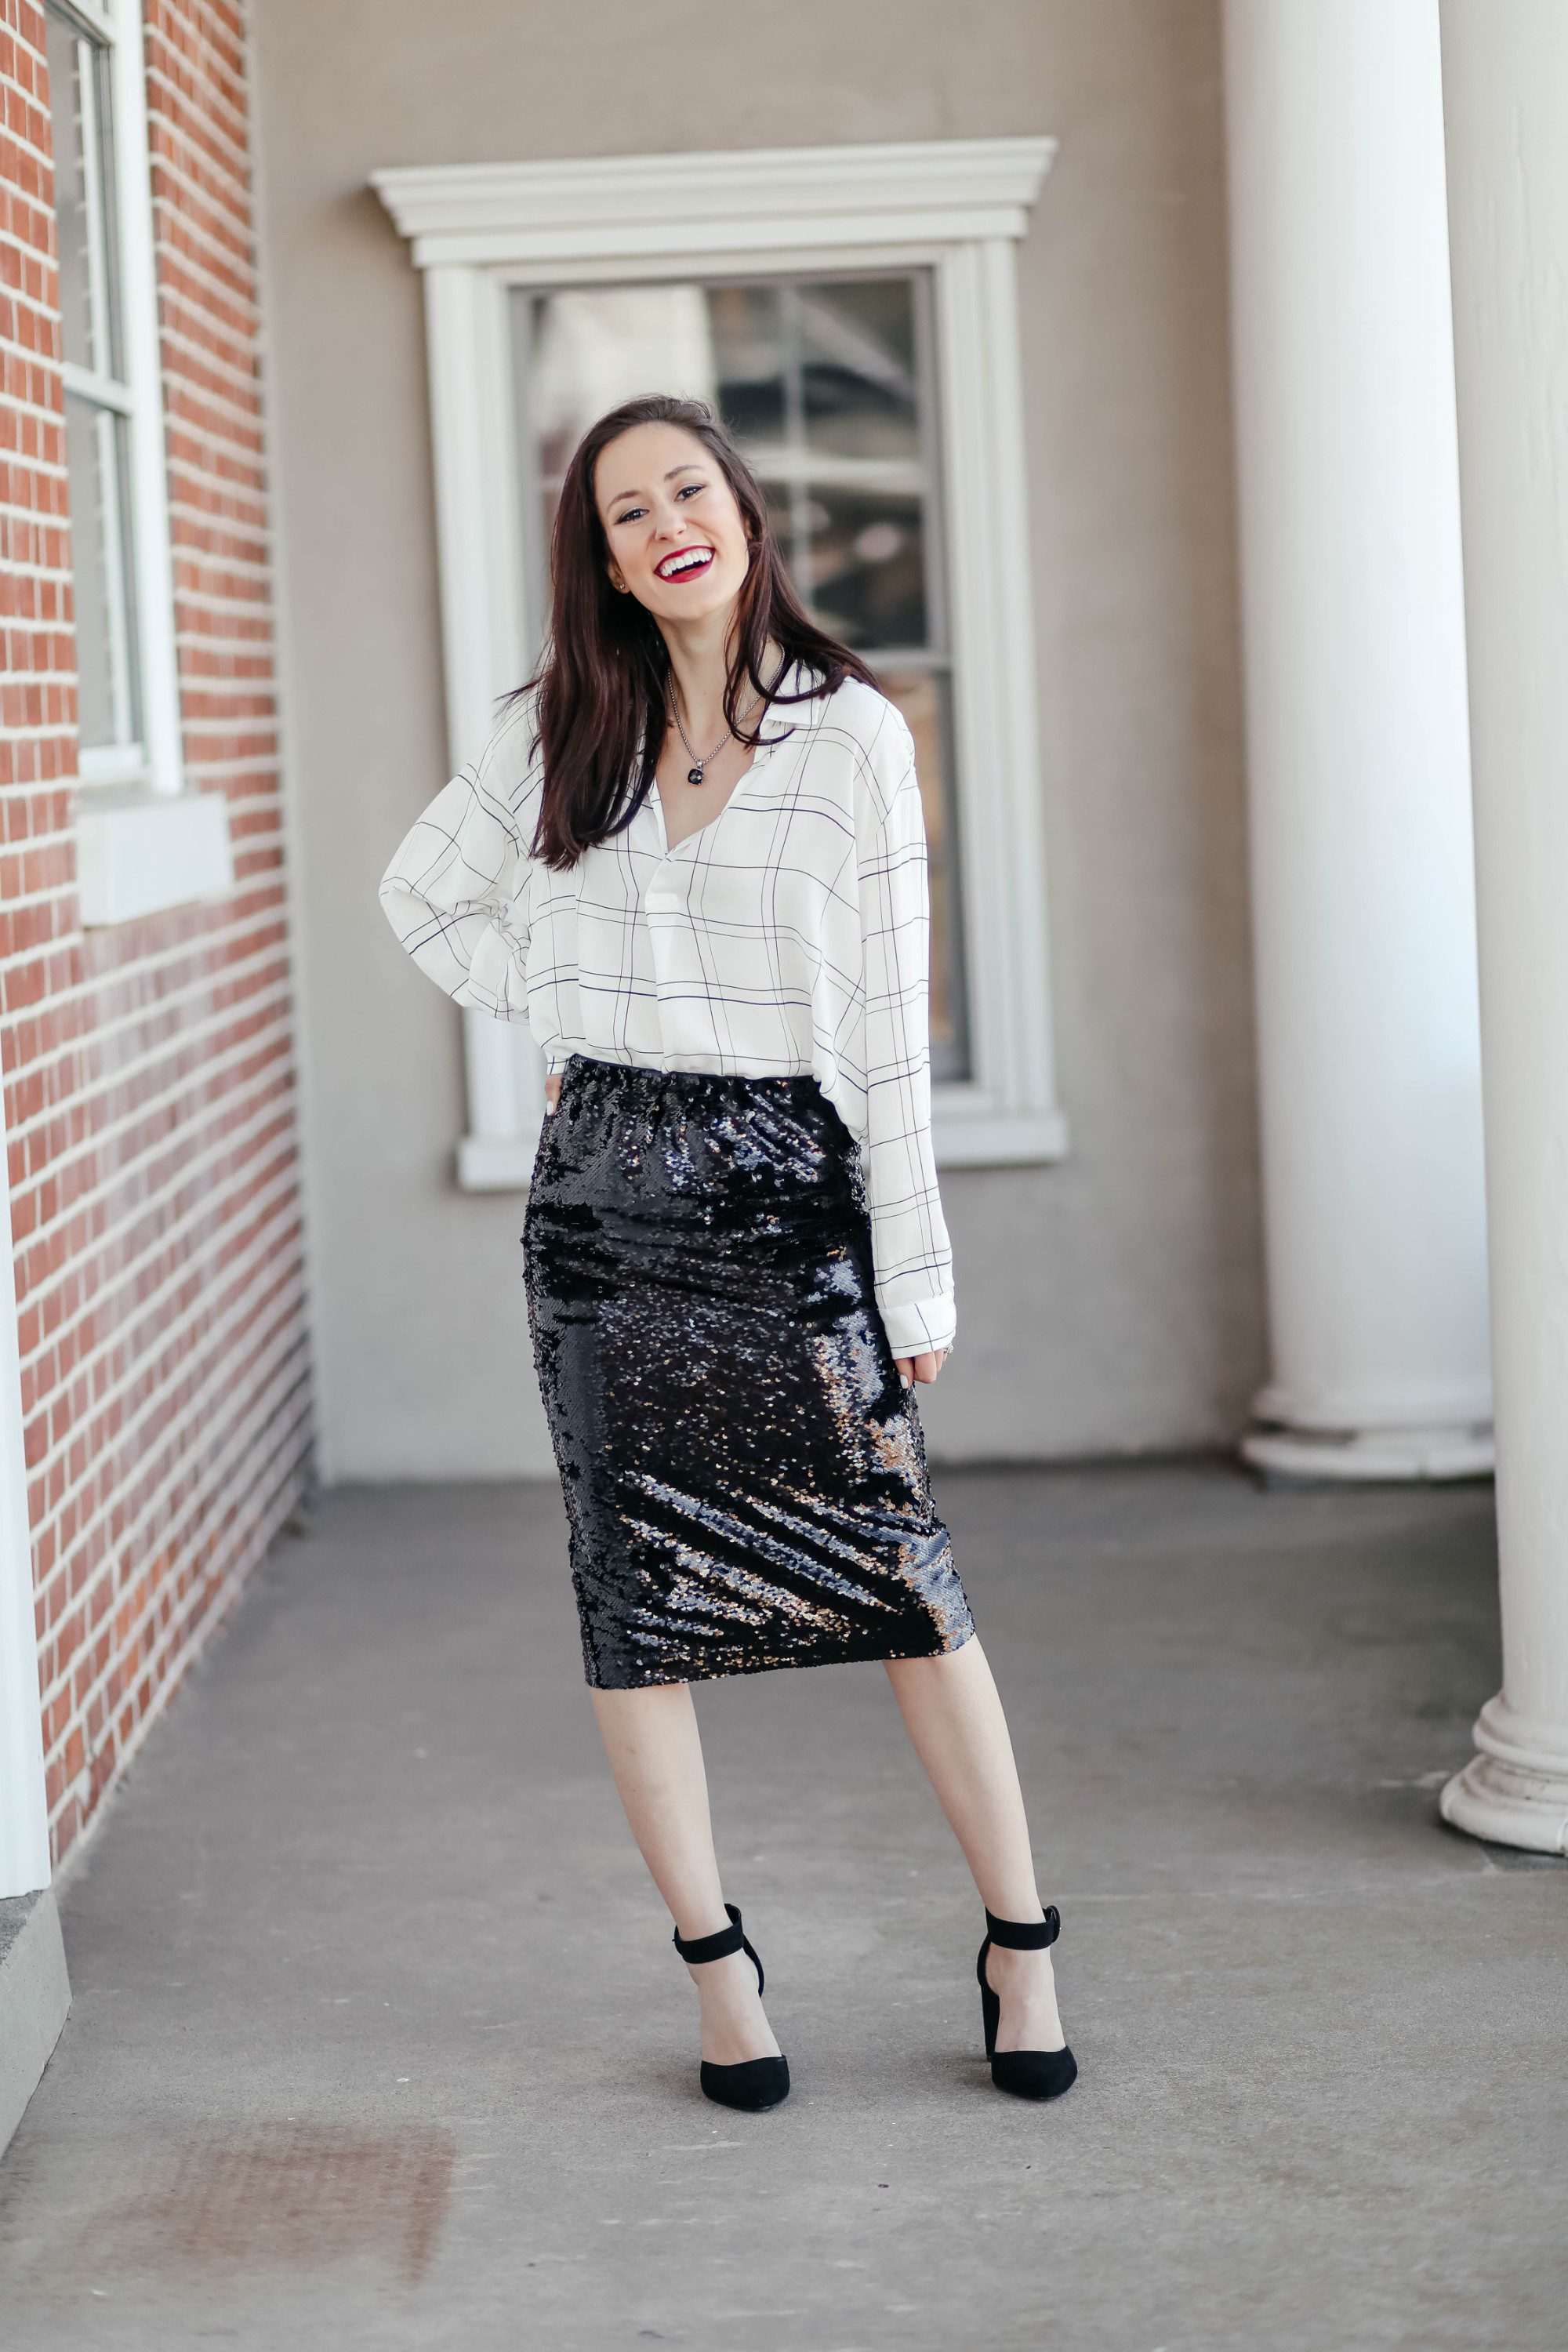 3 WAYS TO WEAR A SEQUIN MIDI SKIRT - 1 Thing, 3 Ways on Coming Up Roses, with an affordable Walmart find (this $39 skirt is perfect for the holidays!)